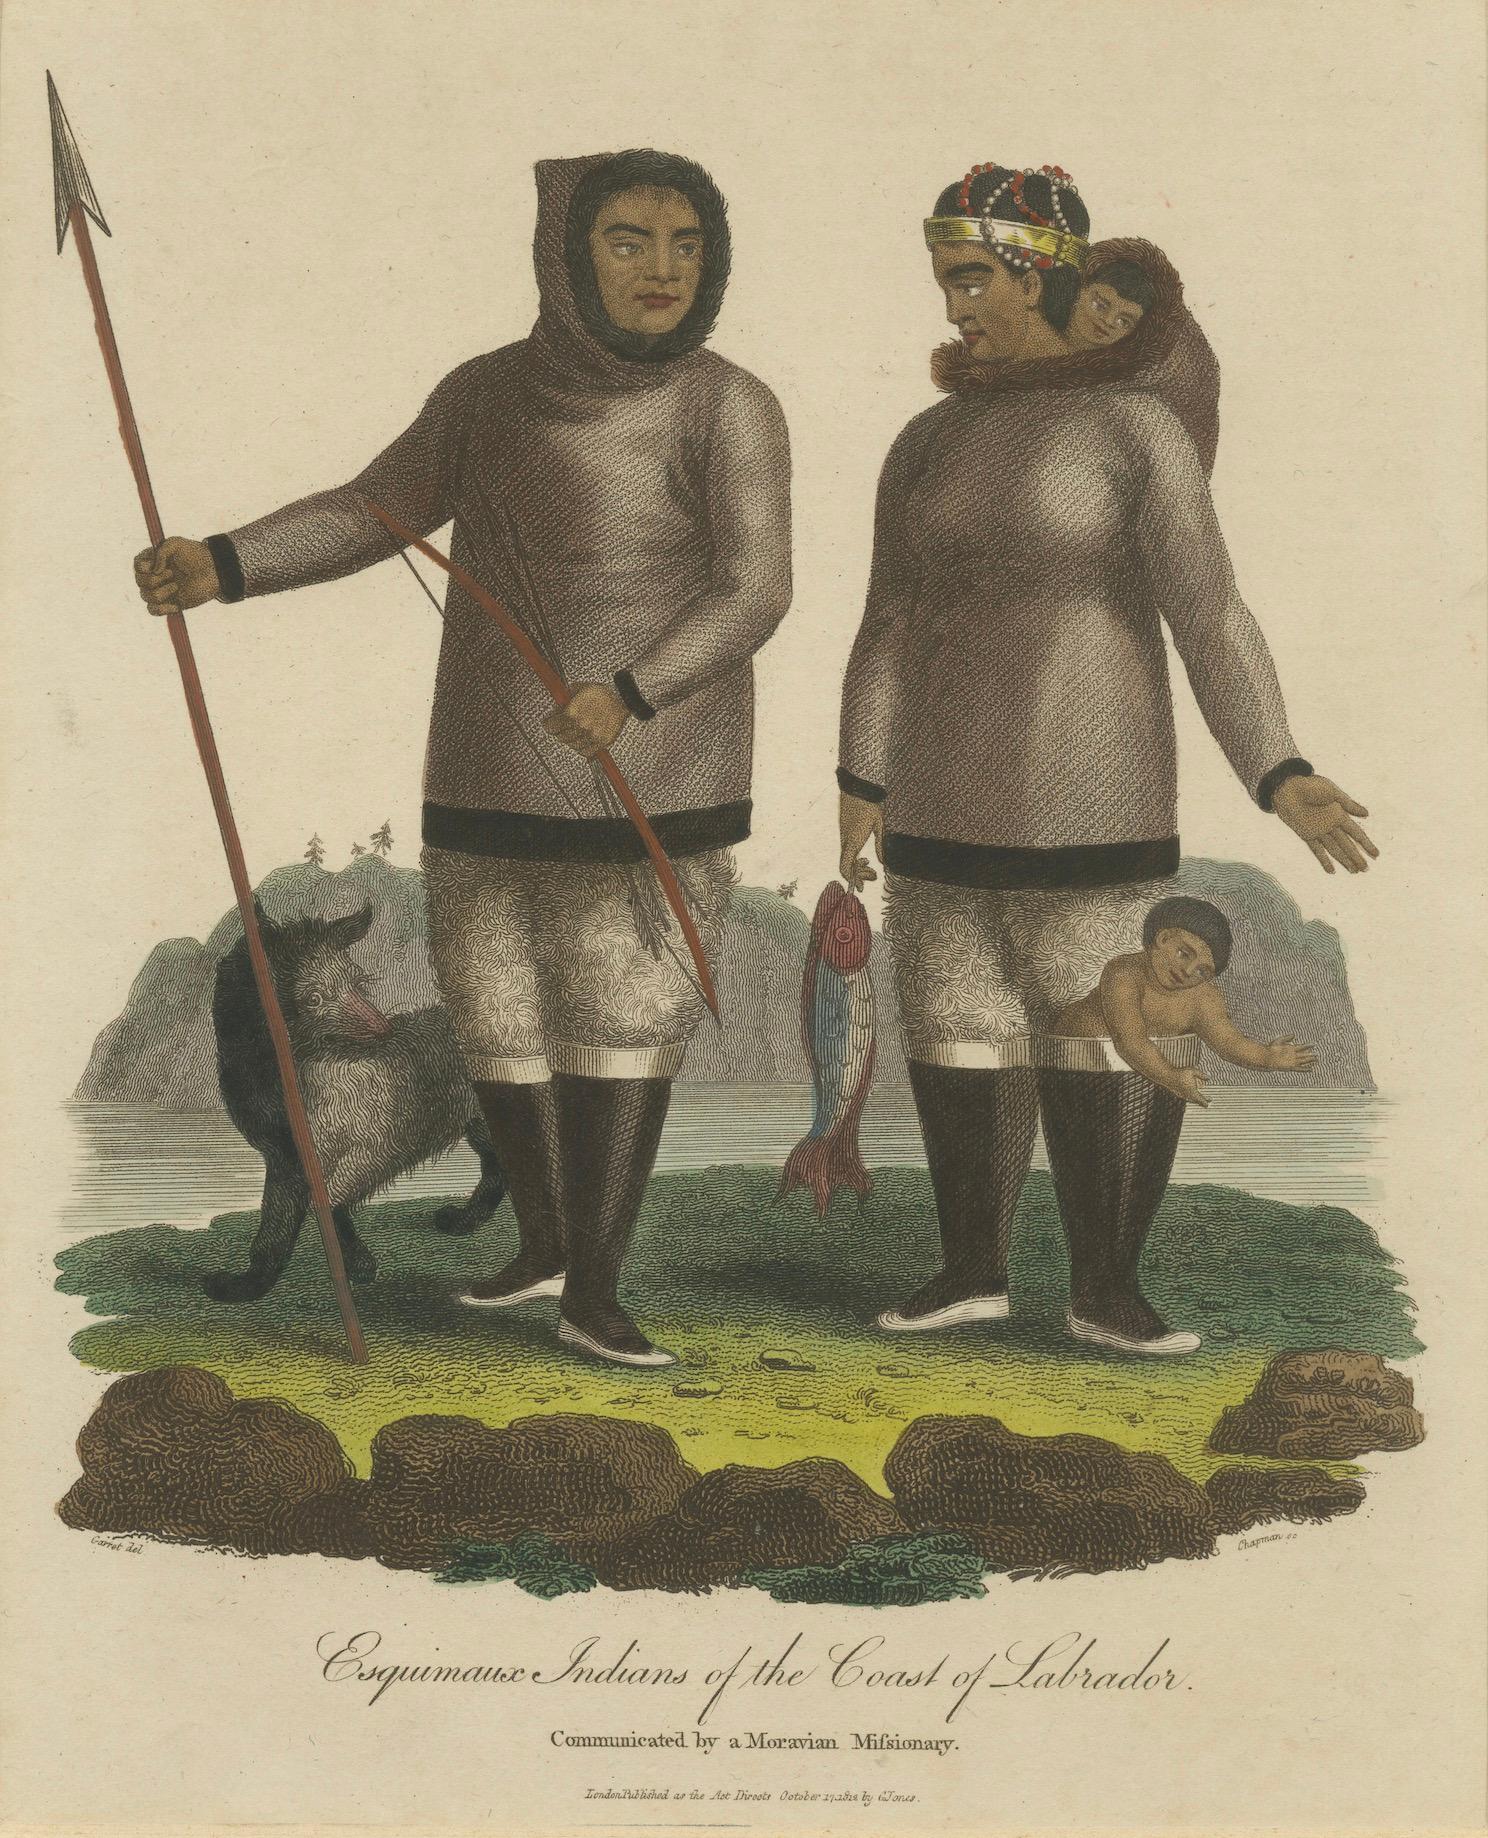 This original hand-colored engraving for sale is a historical print, depicting two indigenous individuals, likely Inuit, referred to in the print as 